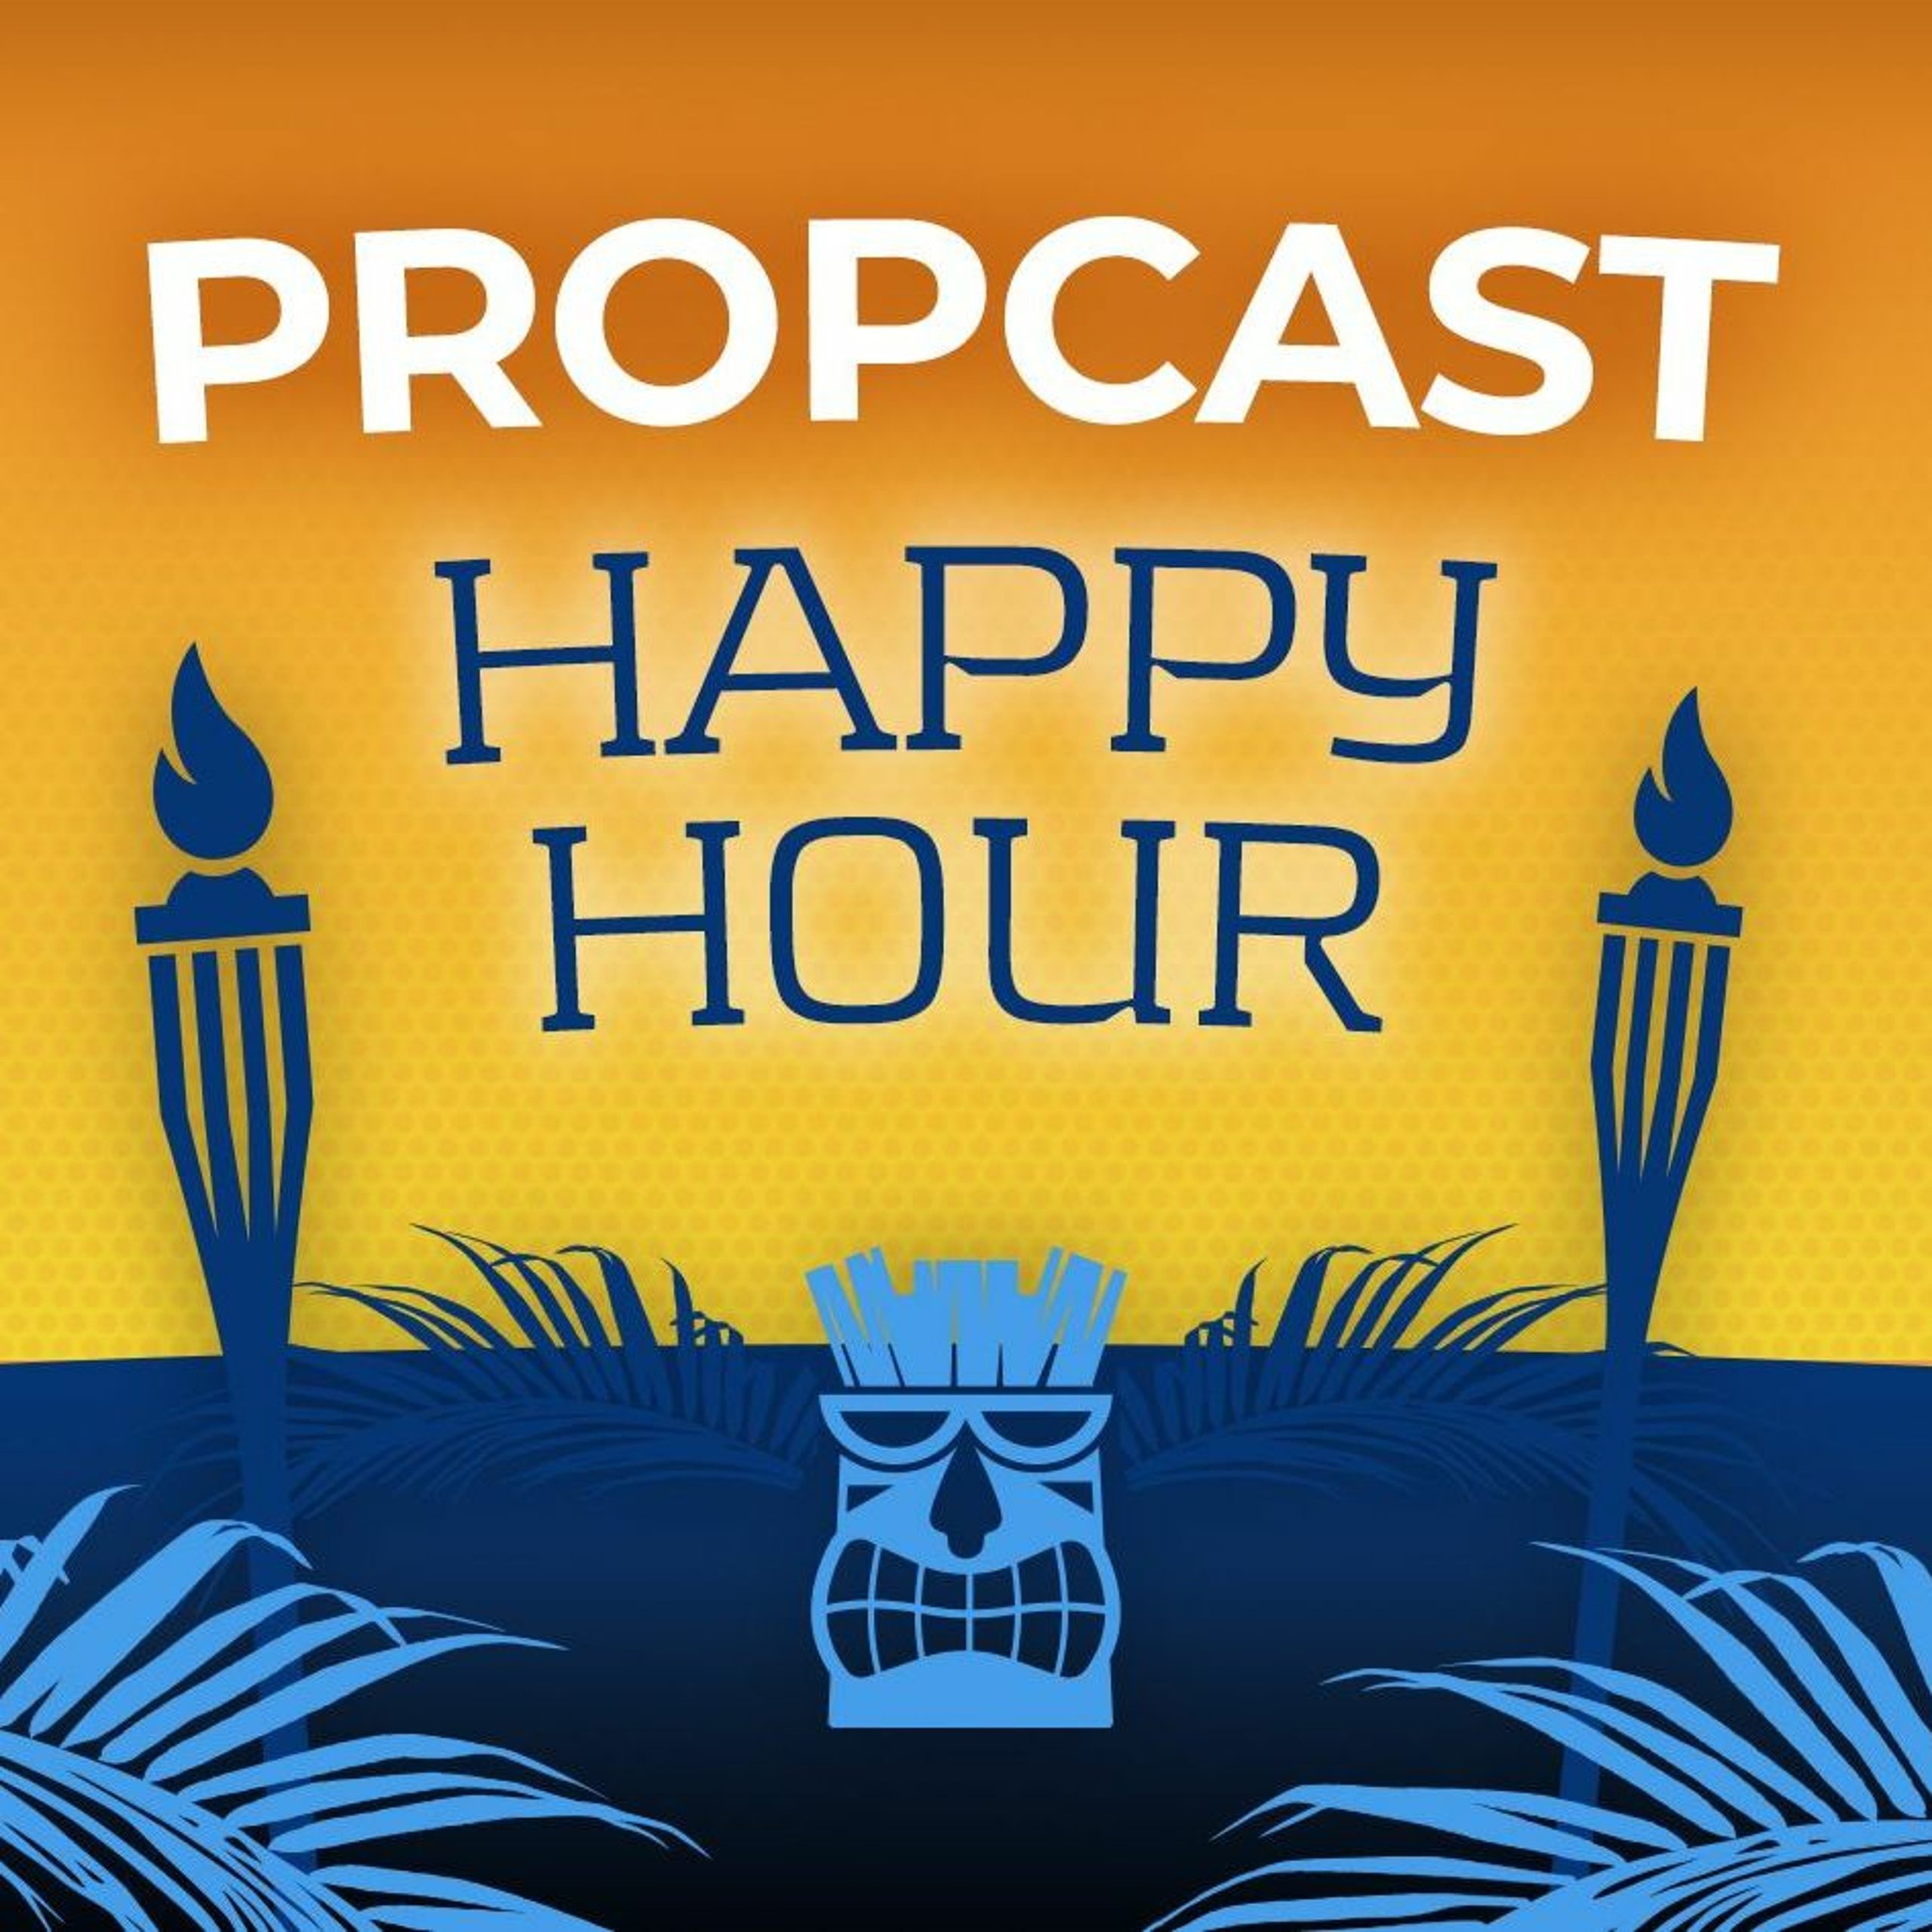 Propcast Happy Hour podcast thumbnail